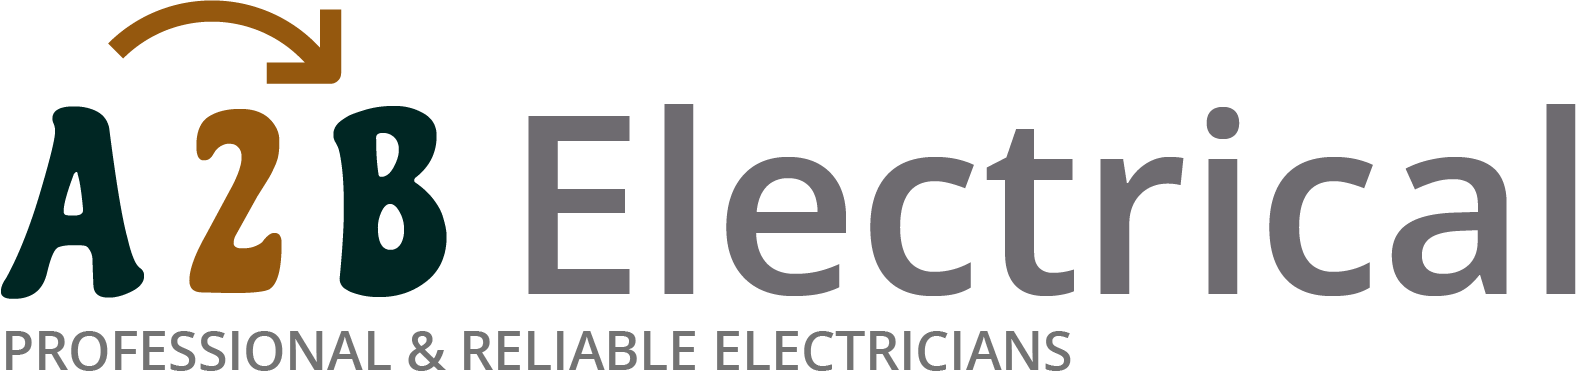 If you have electrical wiring problems in Walthamstow, we can provide an electrician to have a look for you. 